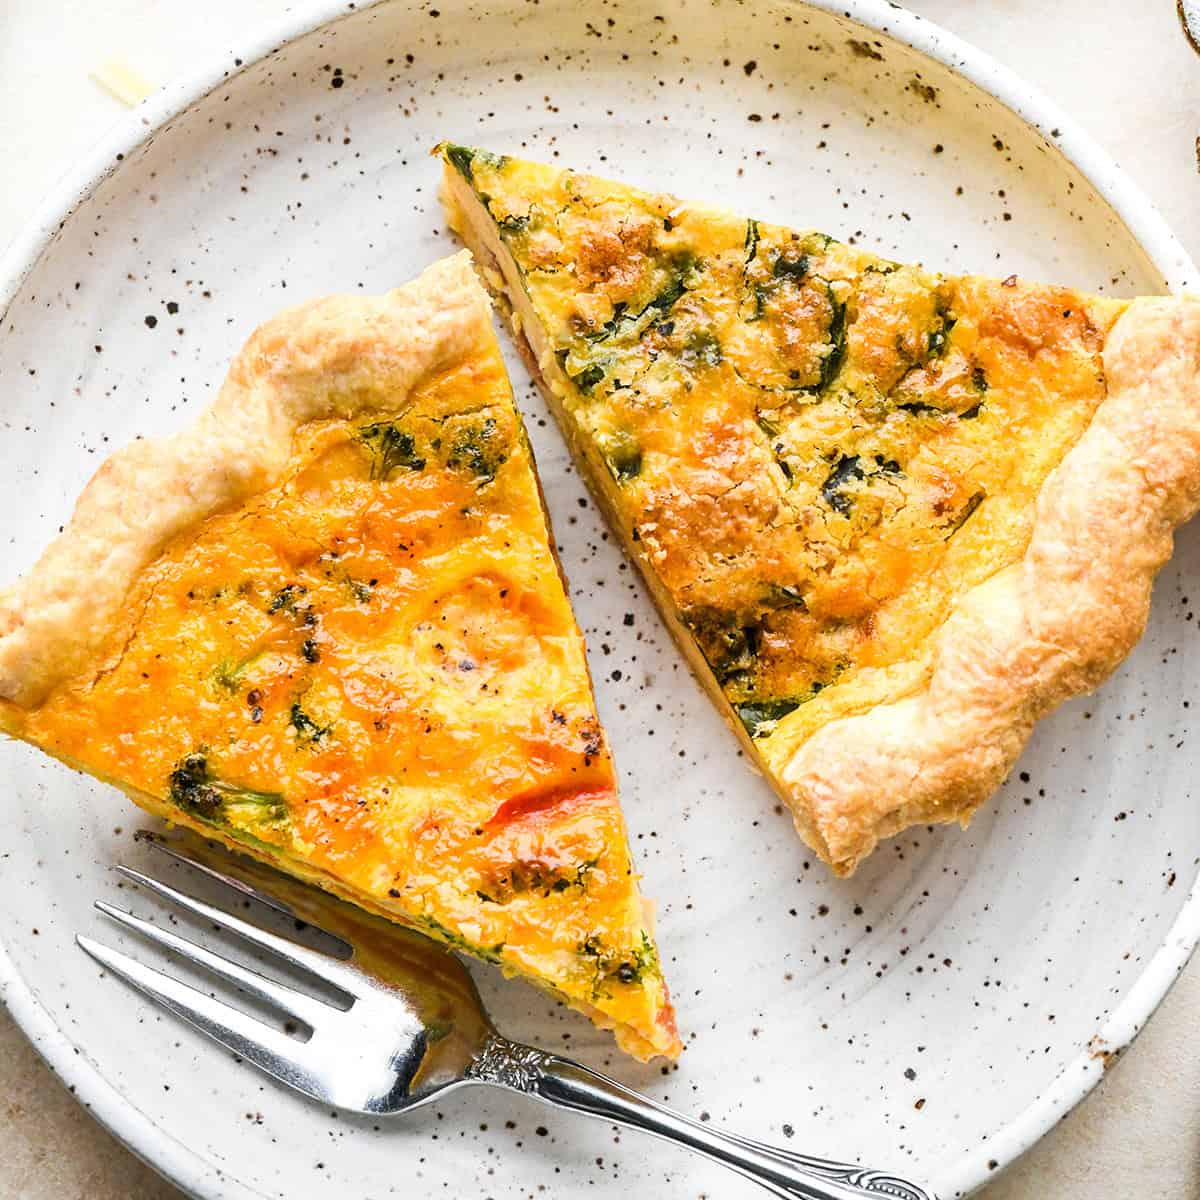 two slices of quiche on a plate - one vegetable quiche one spinach bacon quiche